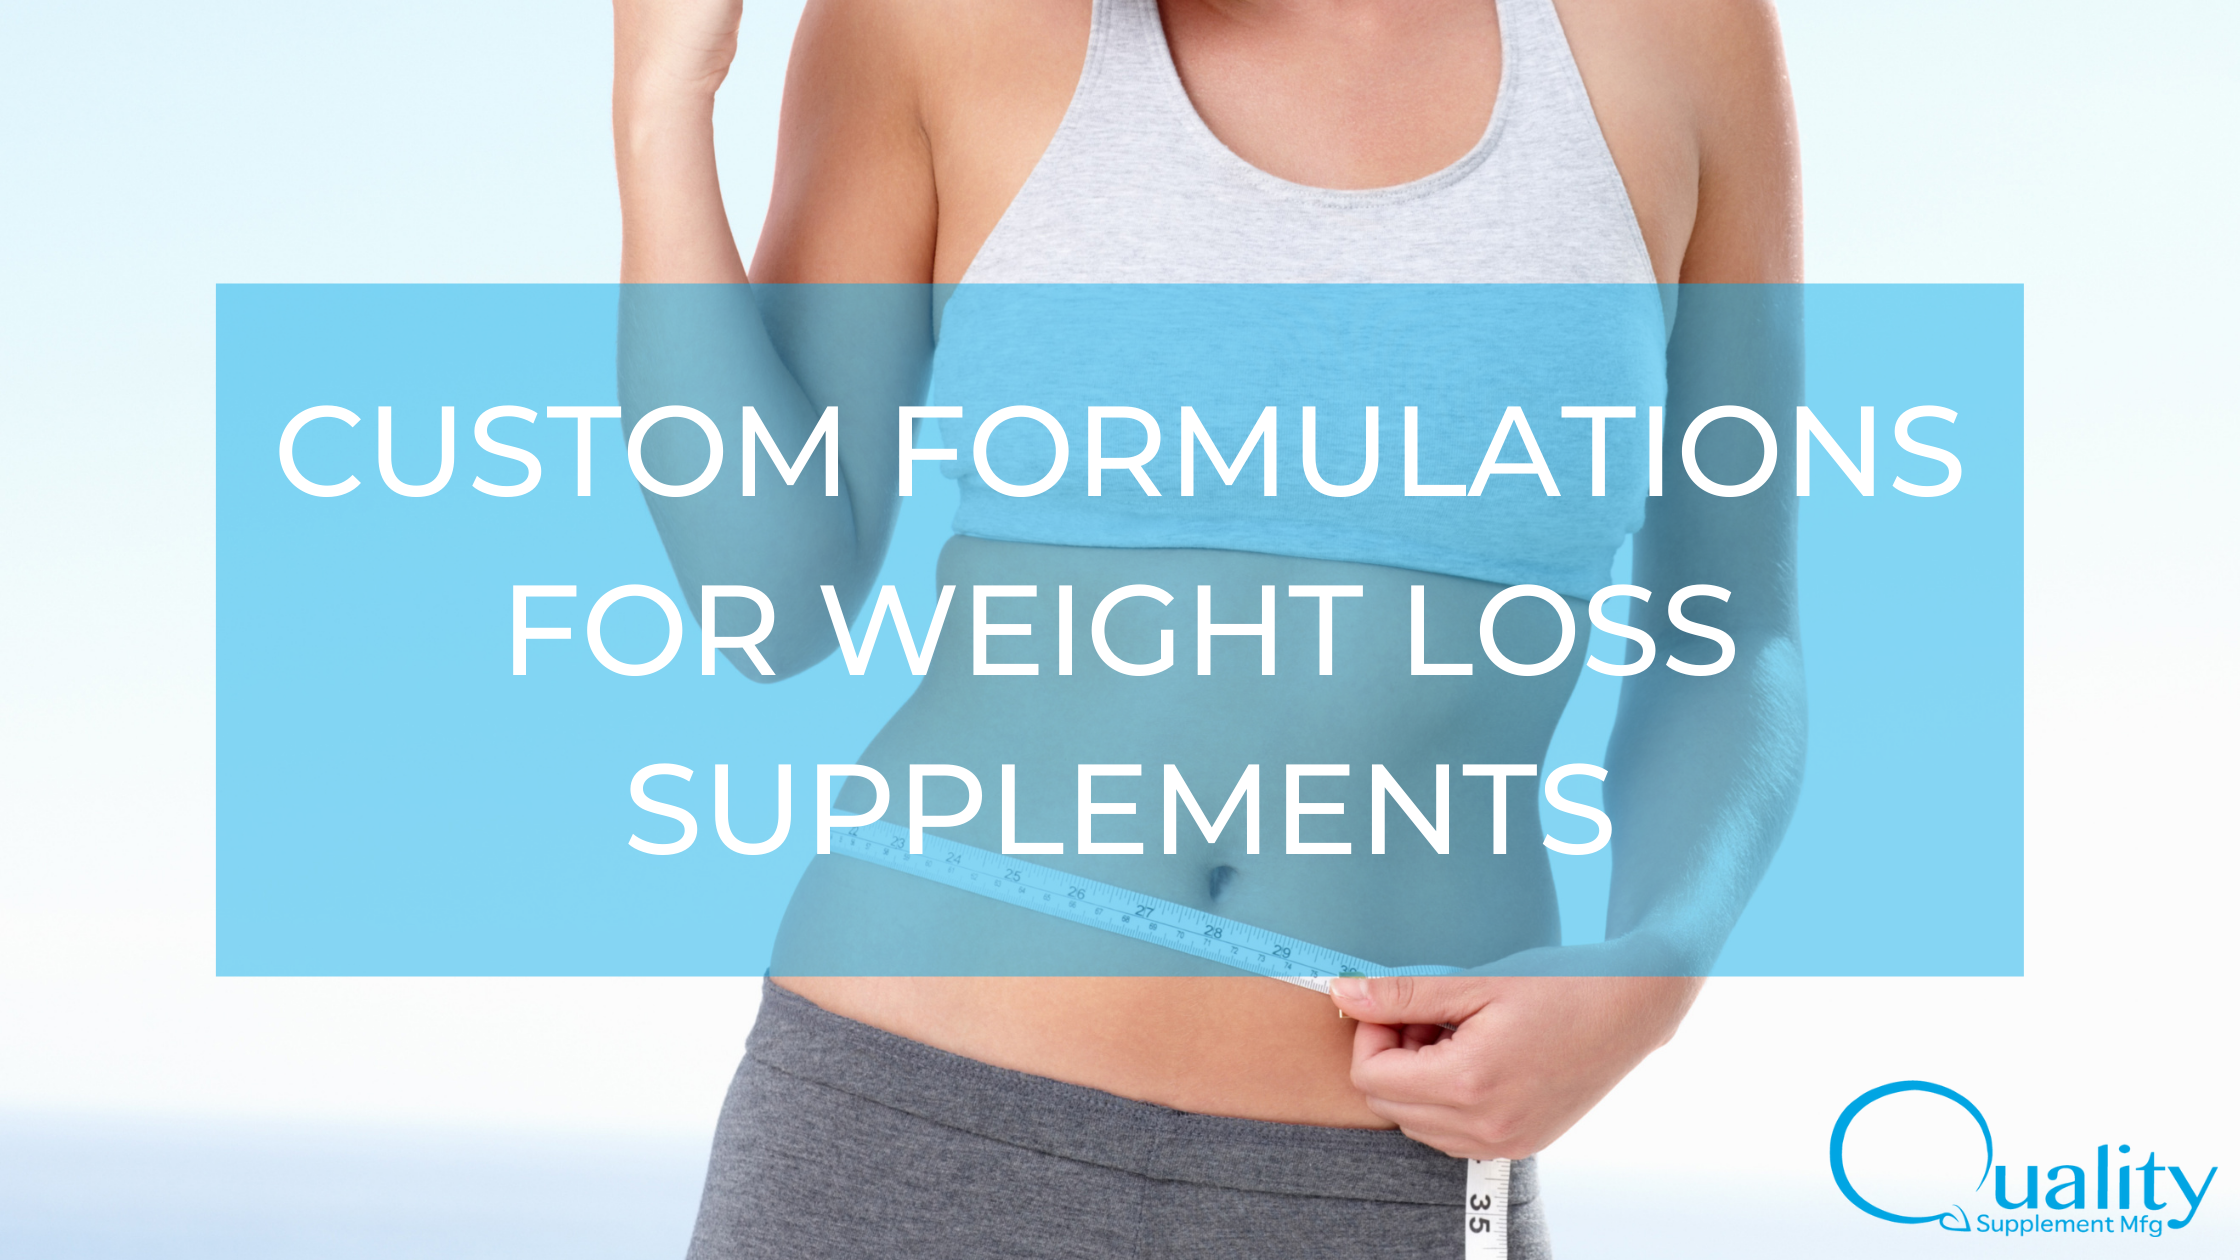 Customizable weight loss supplements